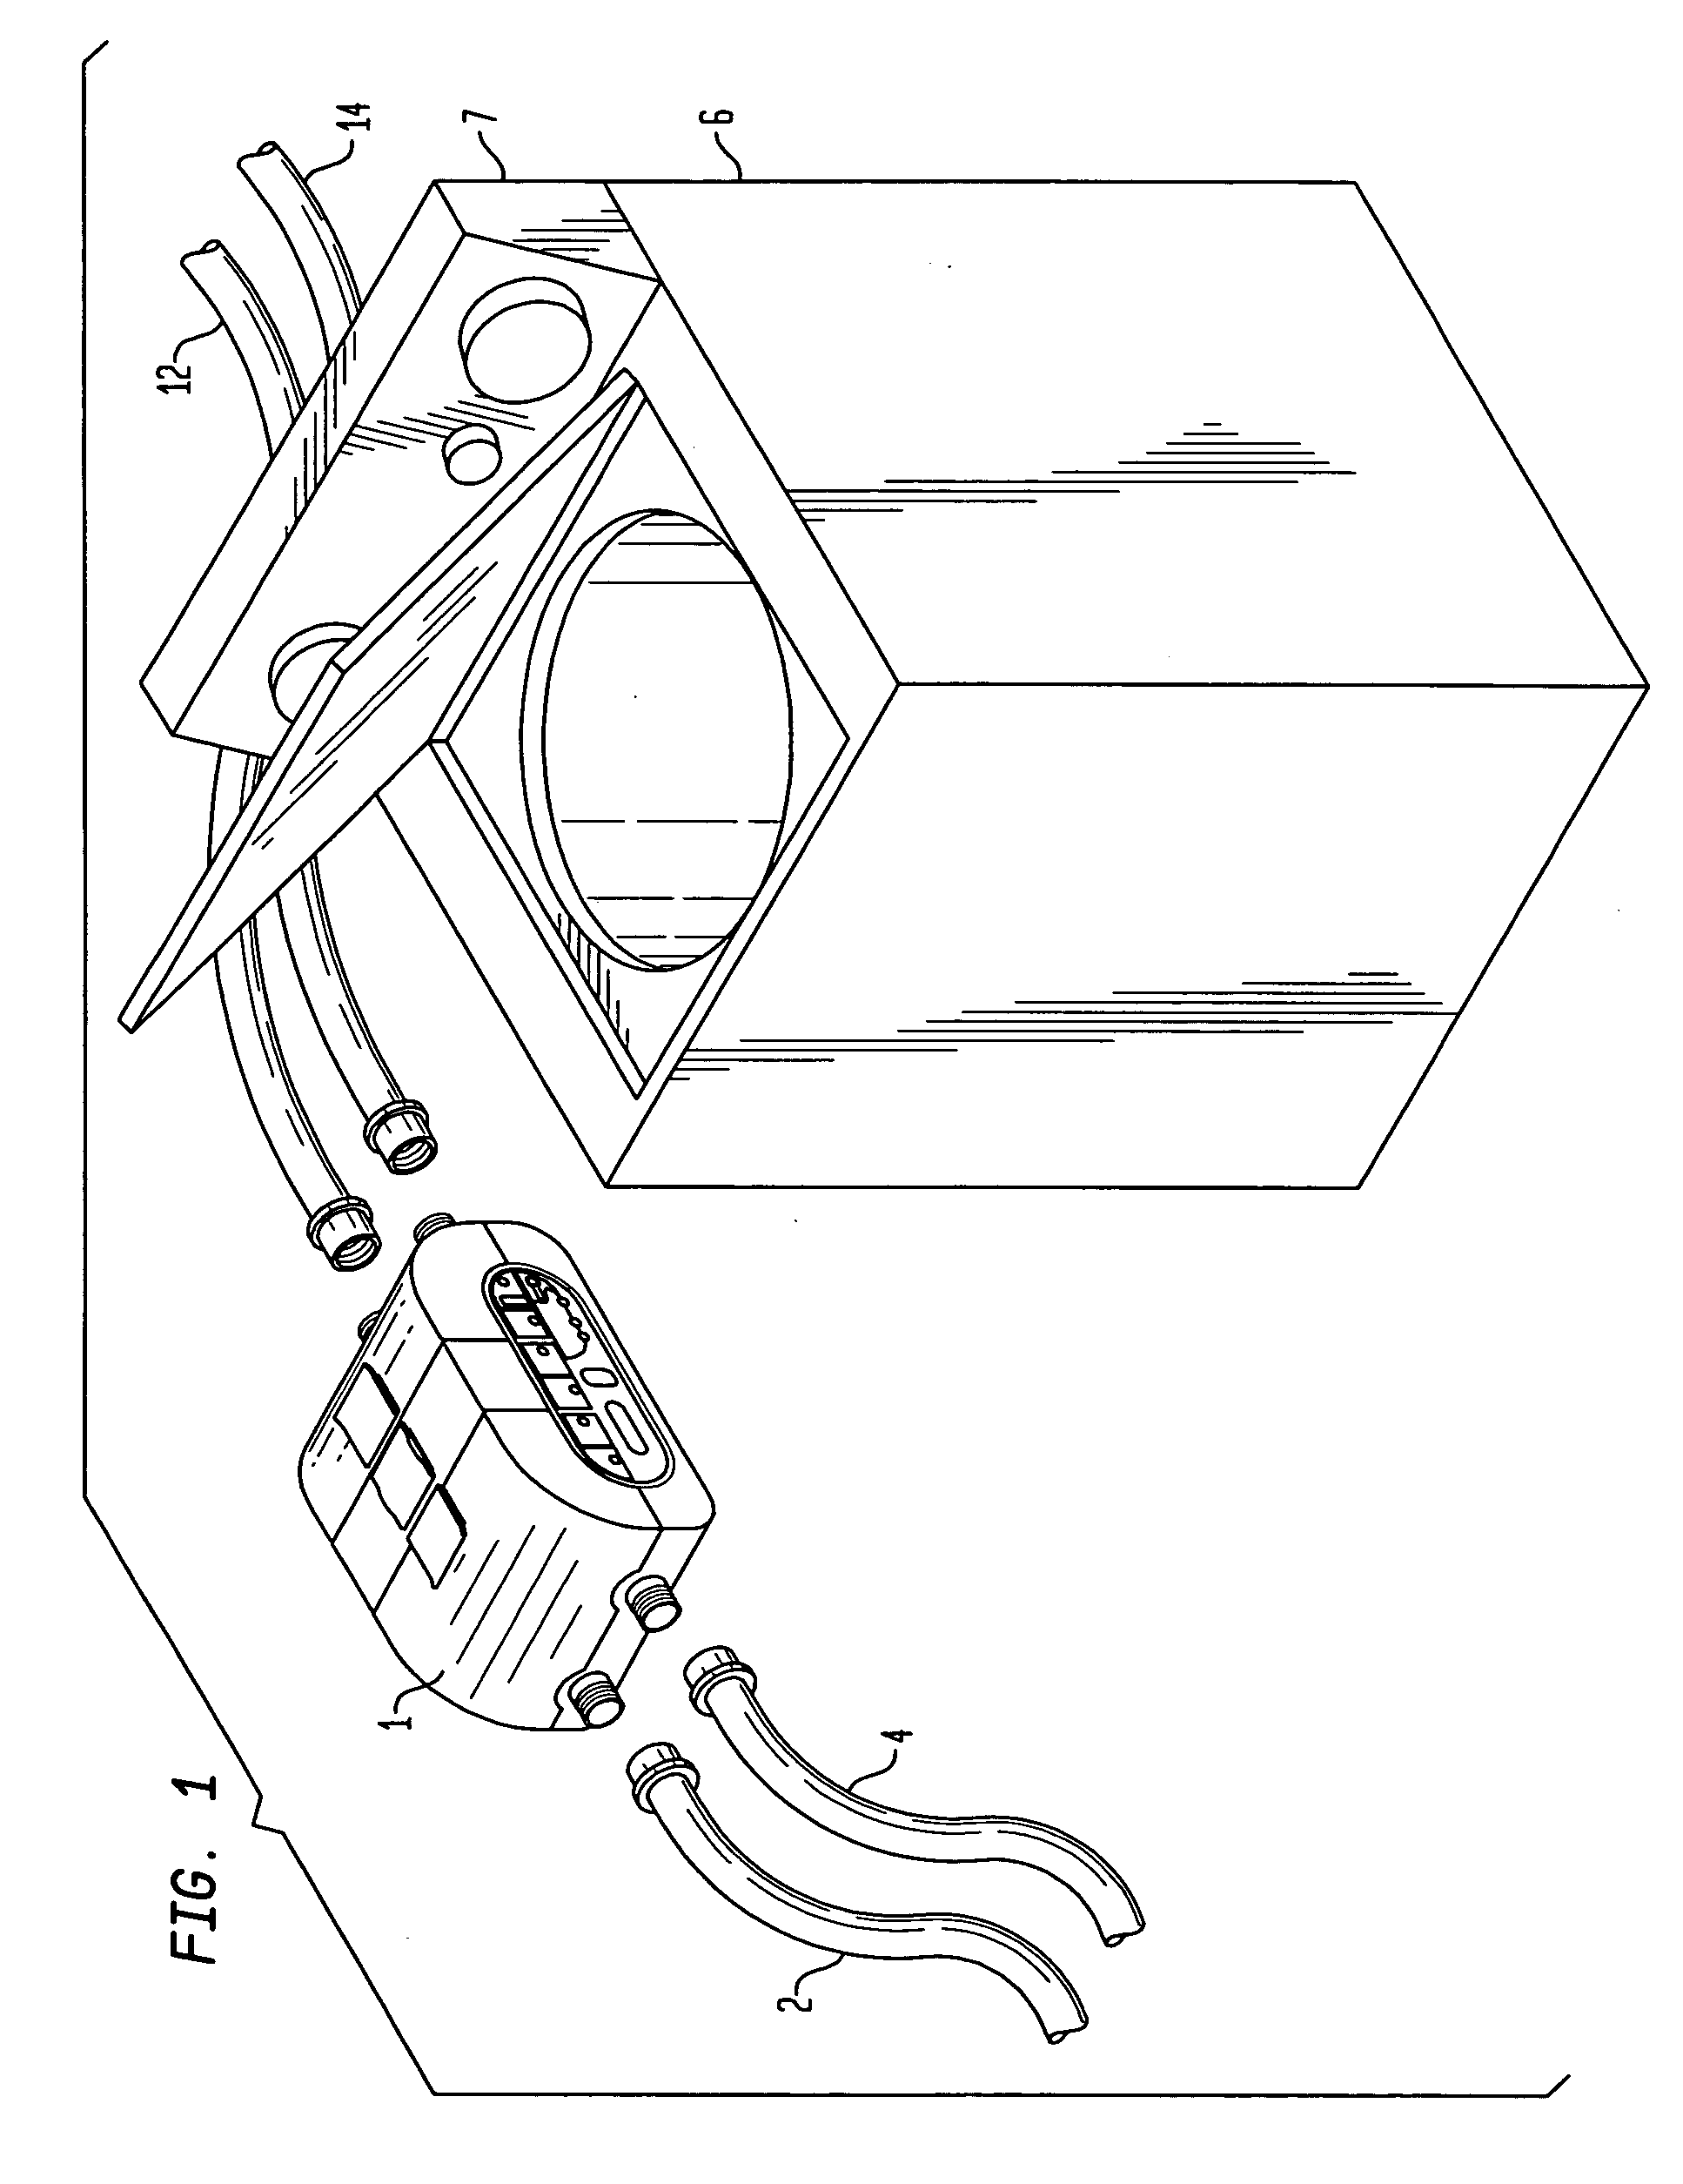 Automatic dispensing device for laundry detergent composition with intermediate chamber